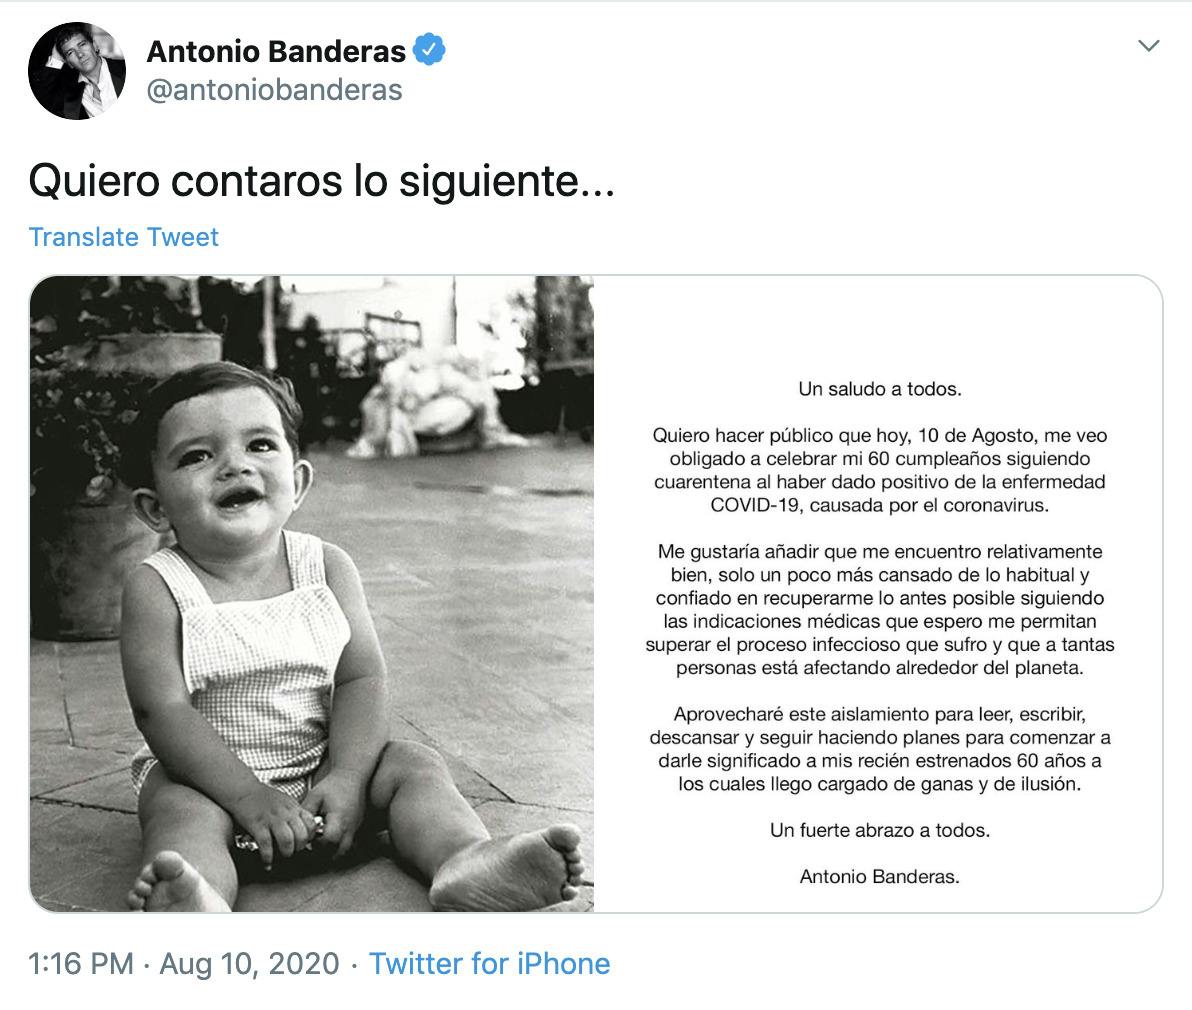 "https://twitter.com/antoniobanderas/status/1292797071909691393"  black and white photo of a small child smiling and screenshot of the statement that's translated below